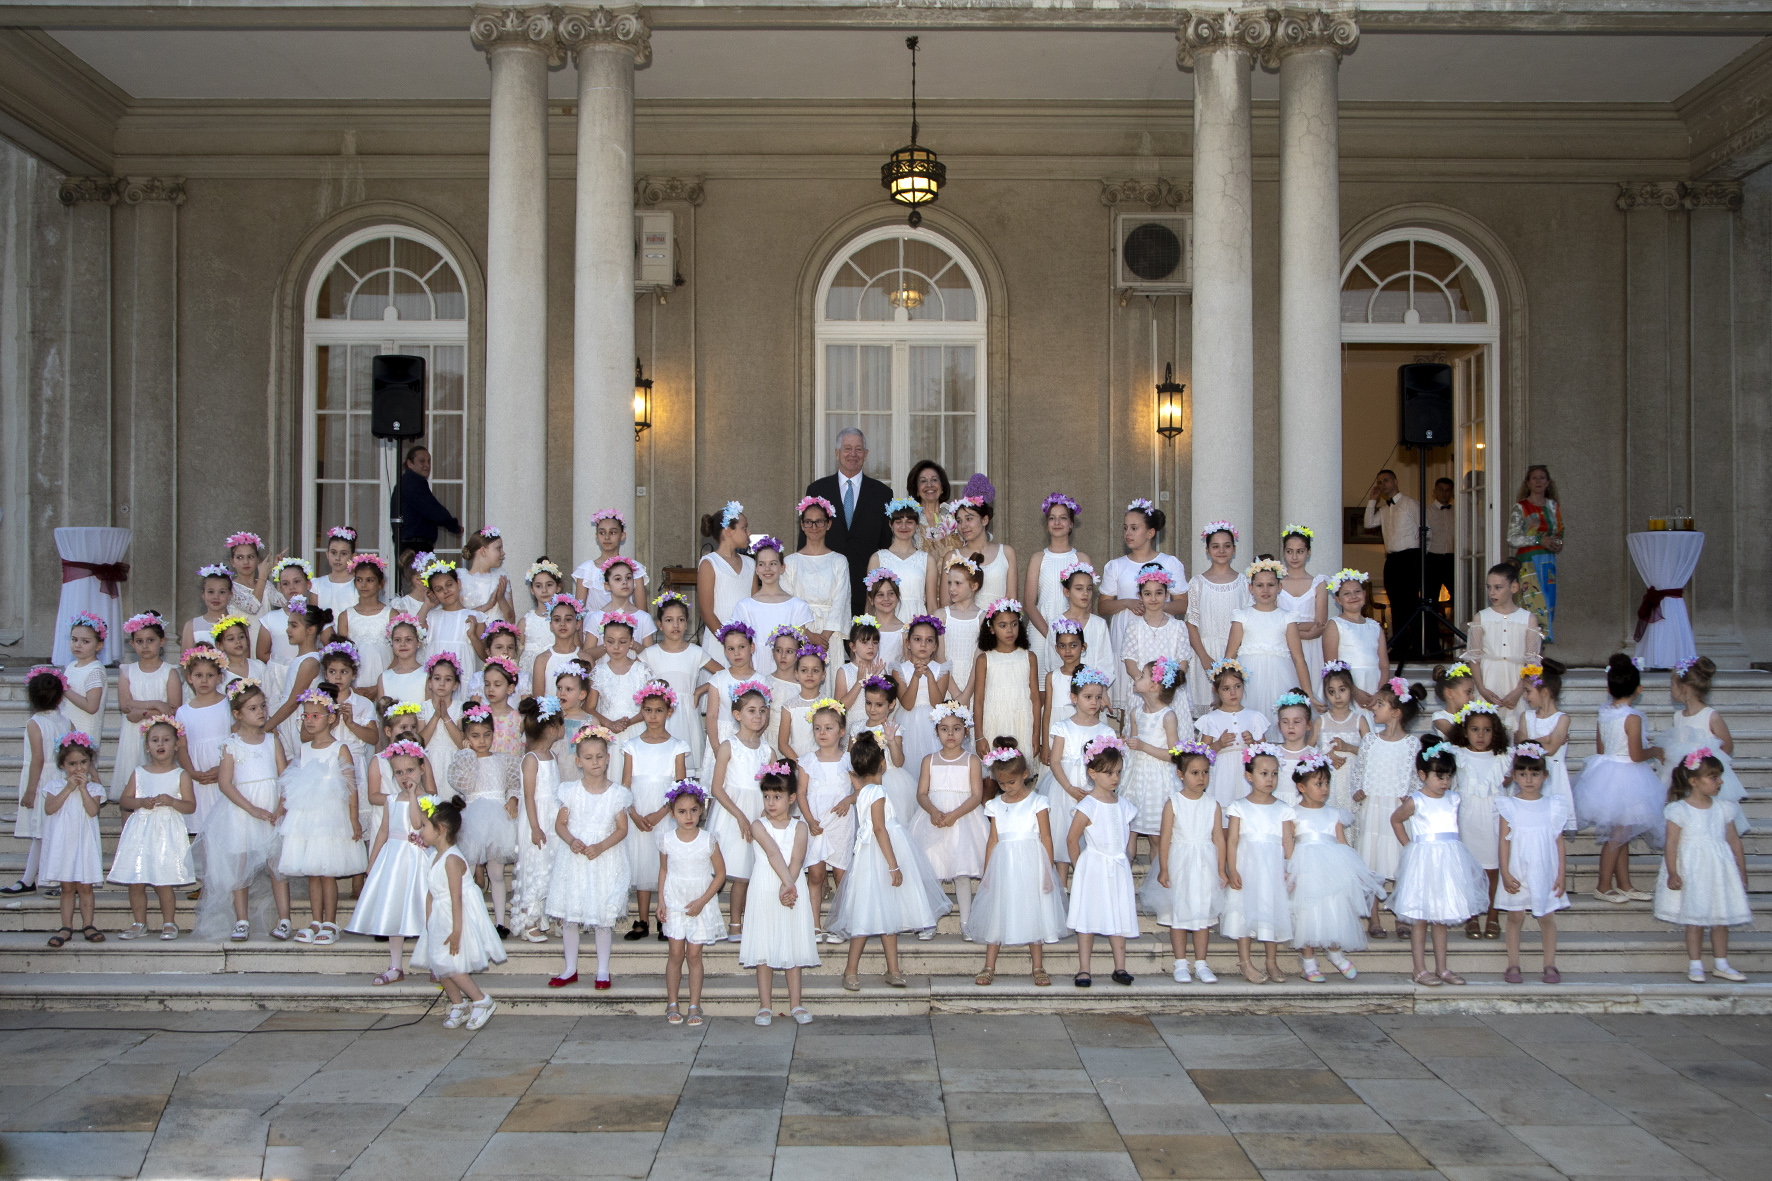 Gala concert “Magic Childhood” at the White Palace, under the patronage of HRH Crown prince Alexander